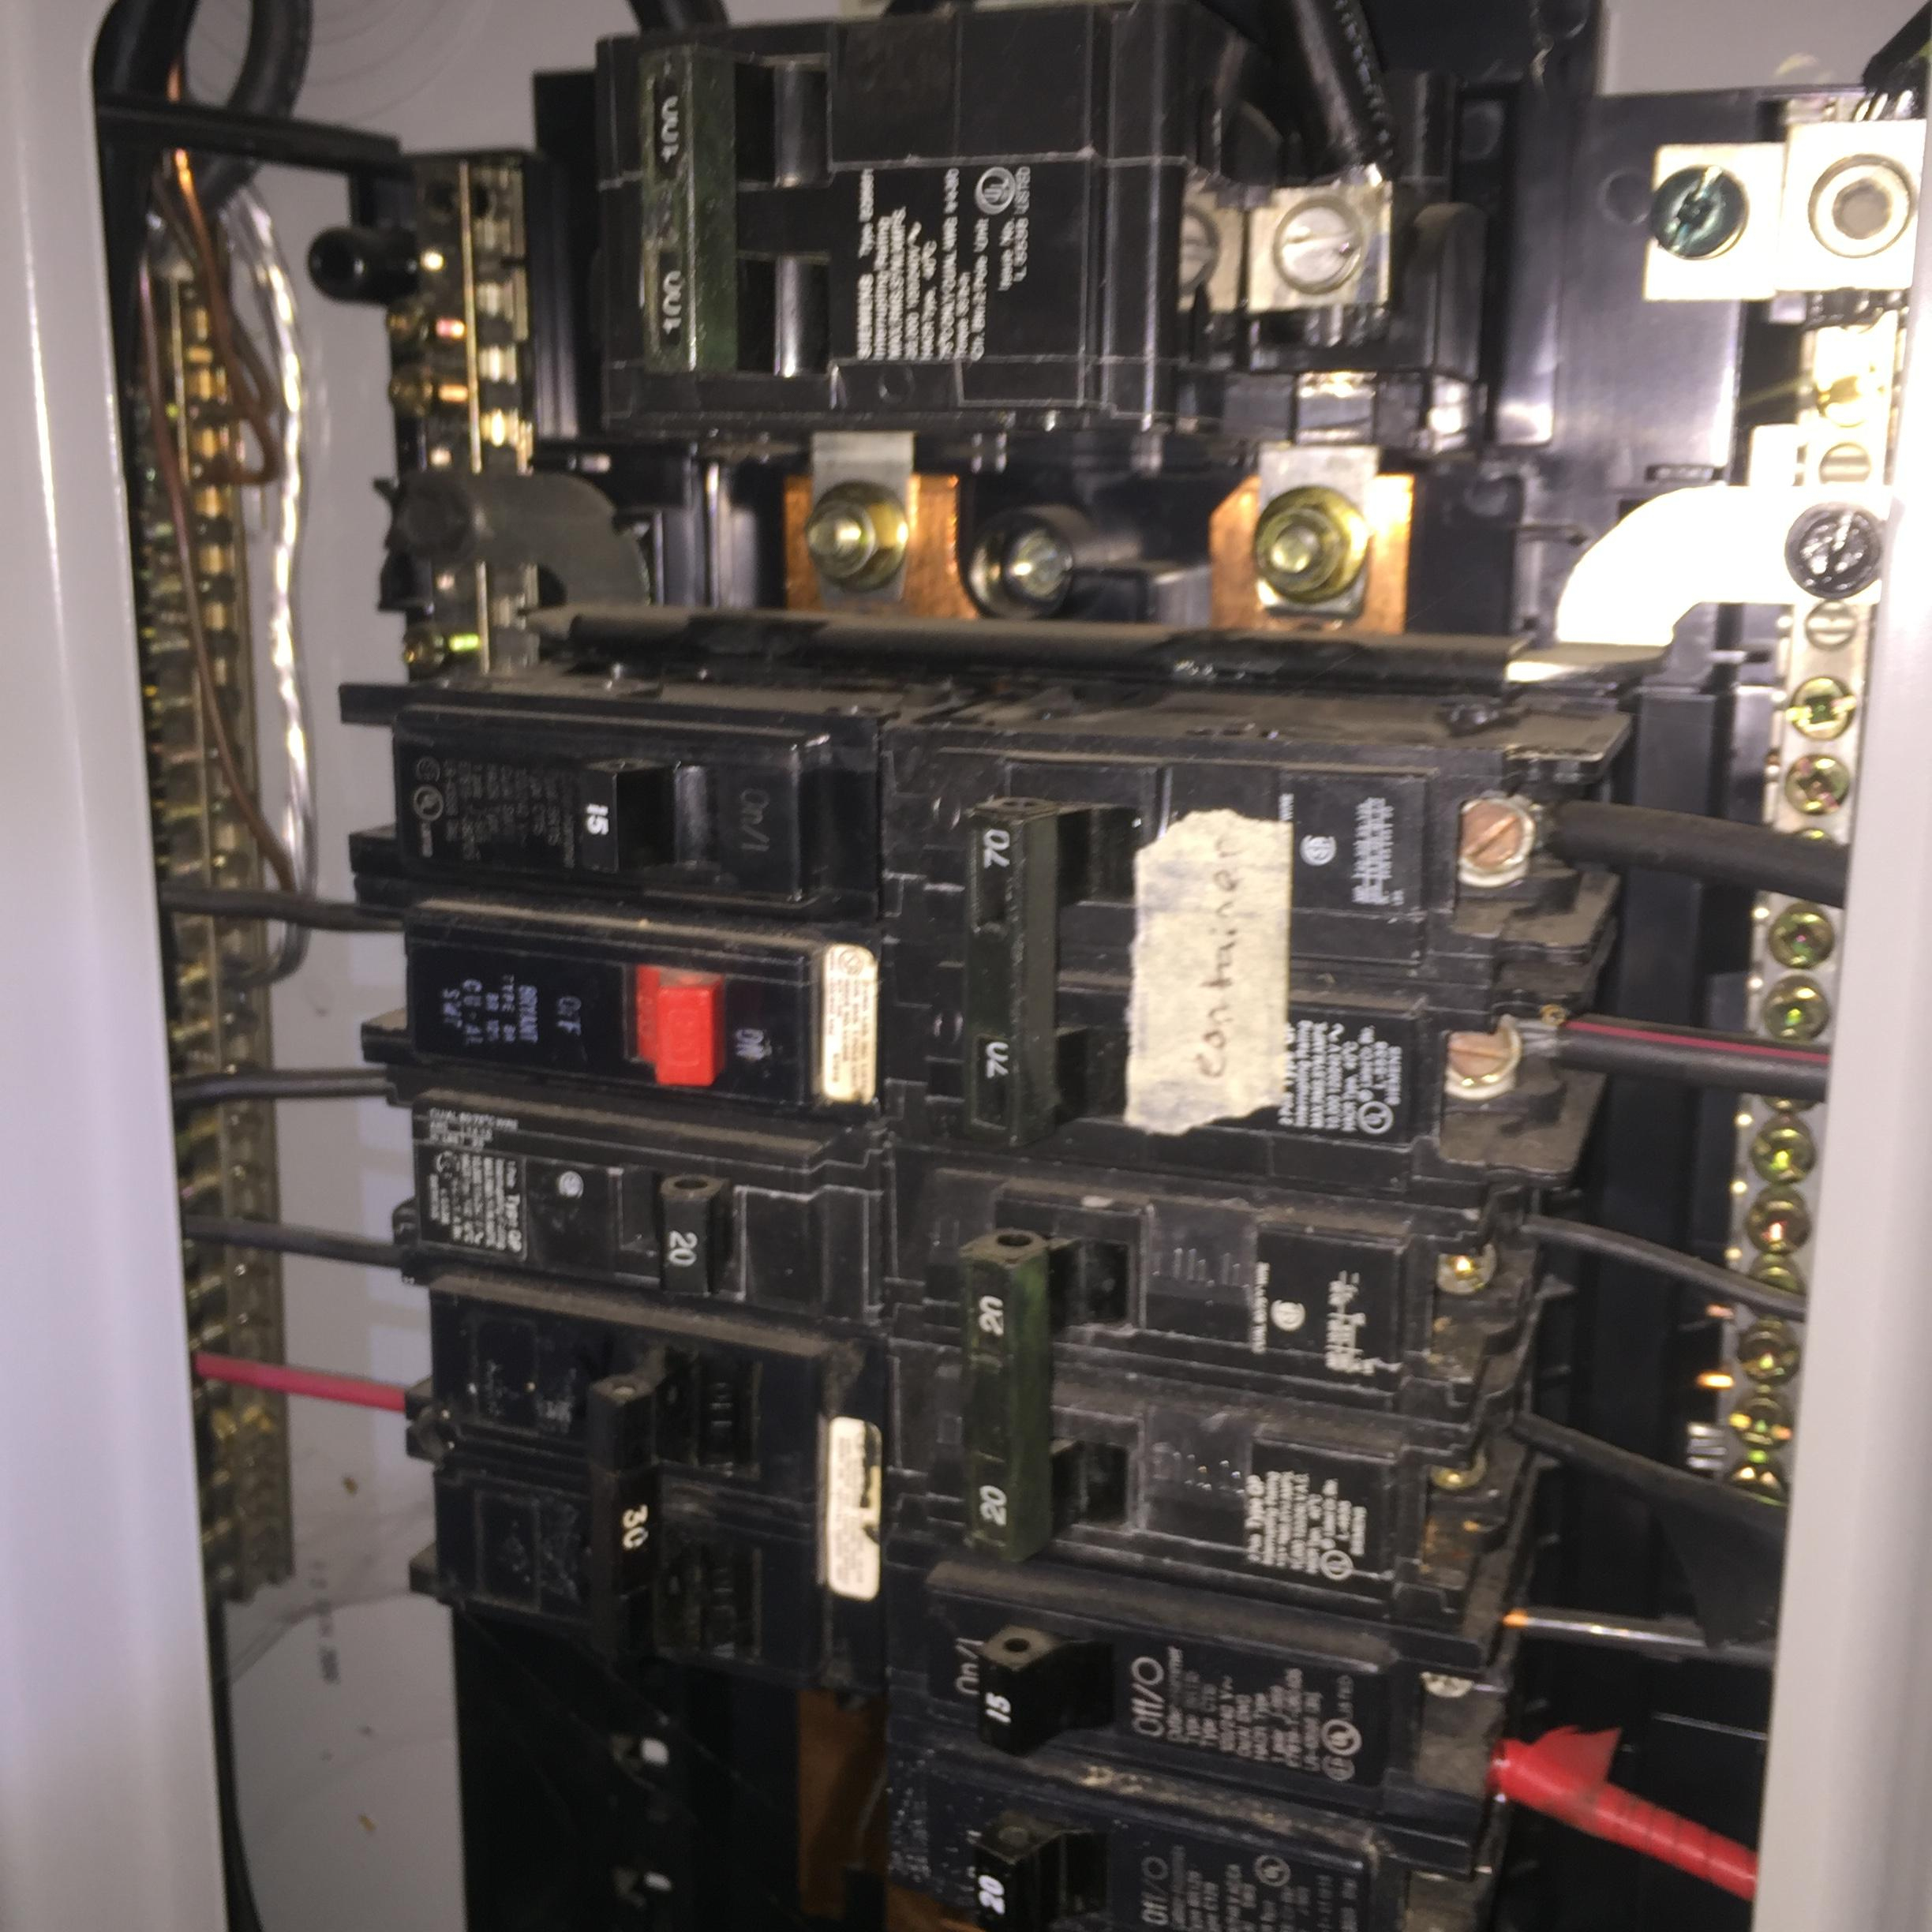 Electrical - Some Questions On Installing 125 Amp Rated Subpanel For - 125 Amp Sub Panel Wiring Diagram